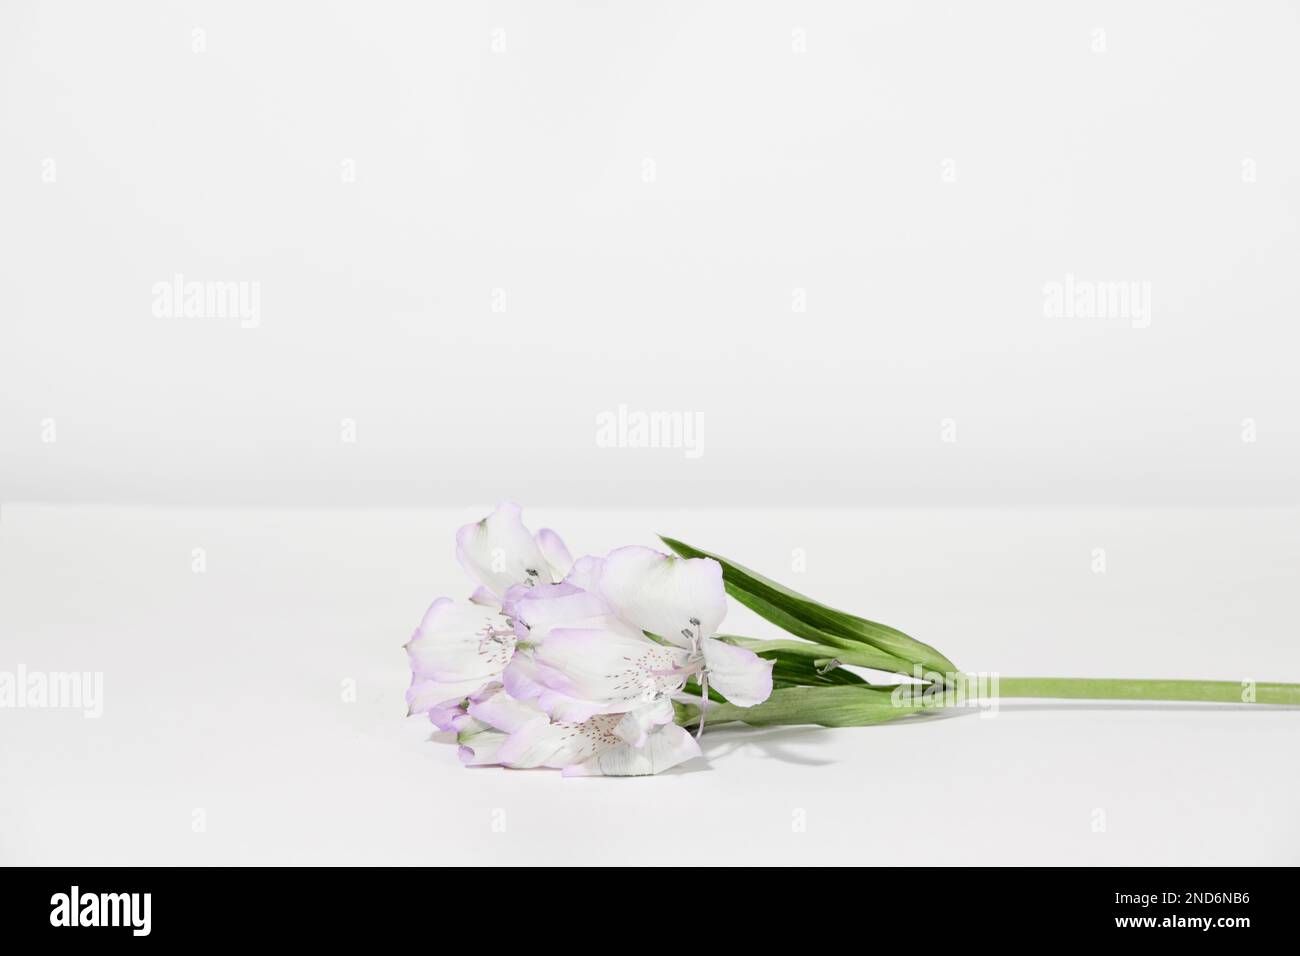 Bouquet of white lilac Alstroemeria flowers on a white table, on a grey background. Creative kind of flowers. Stock Photo